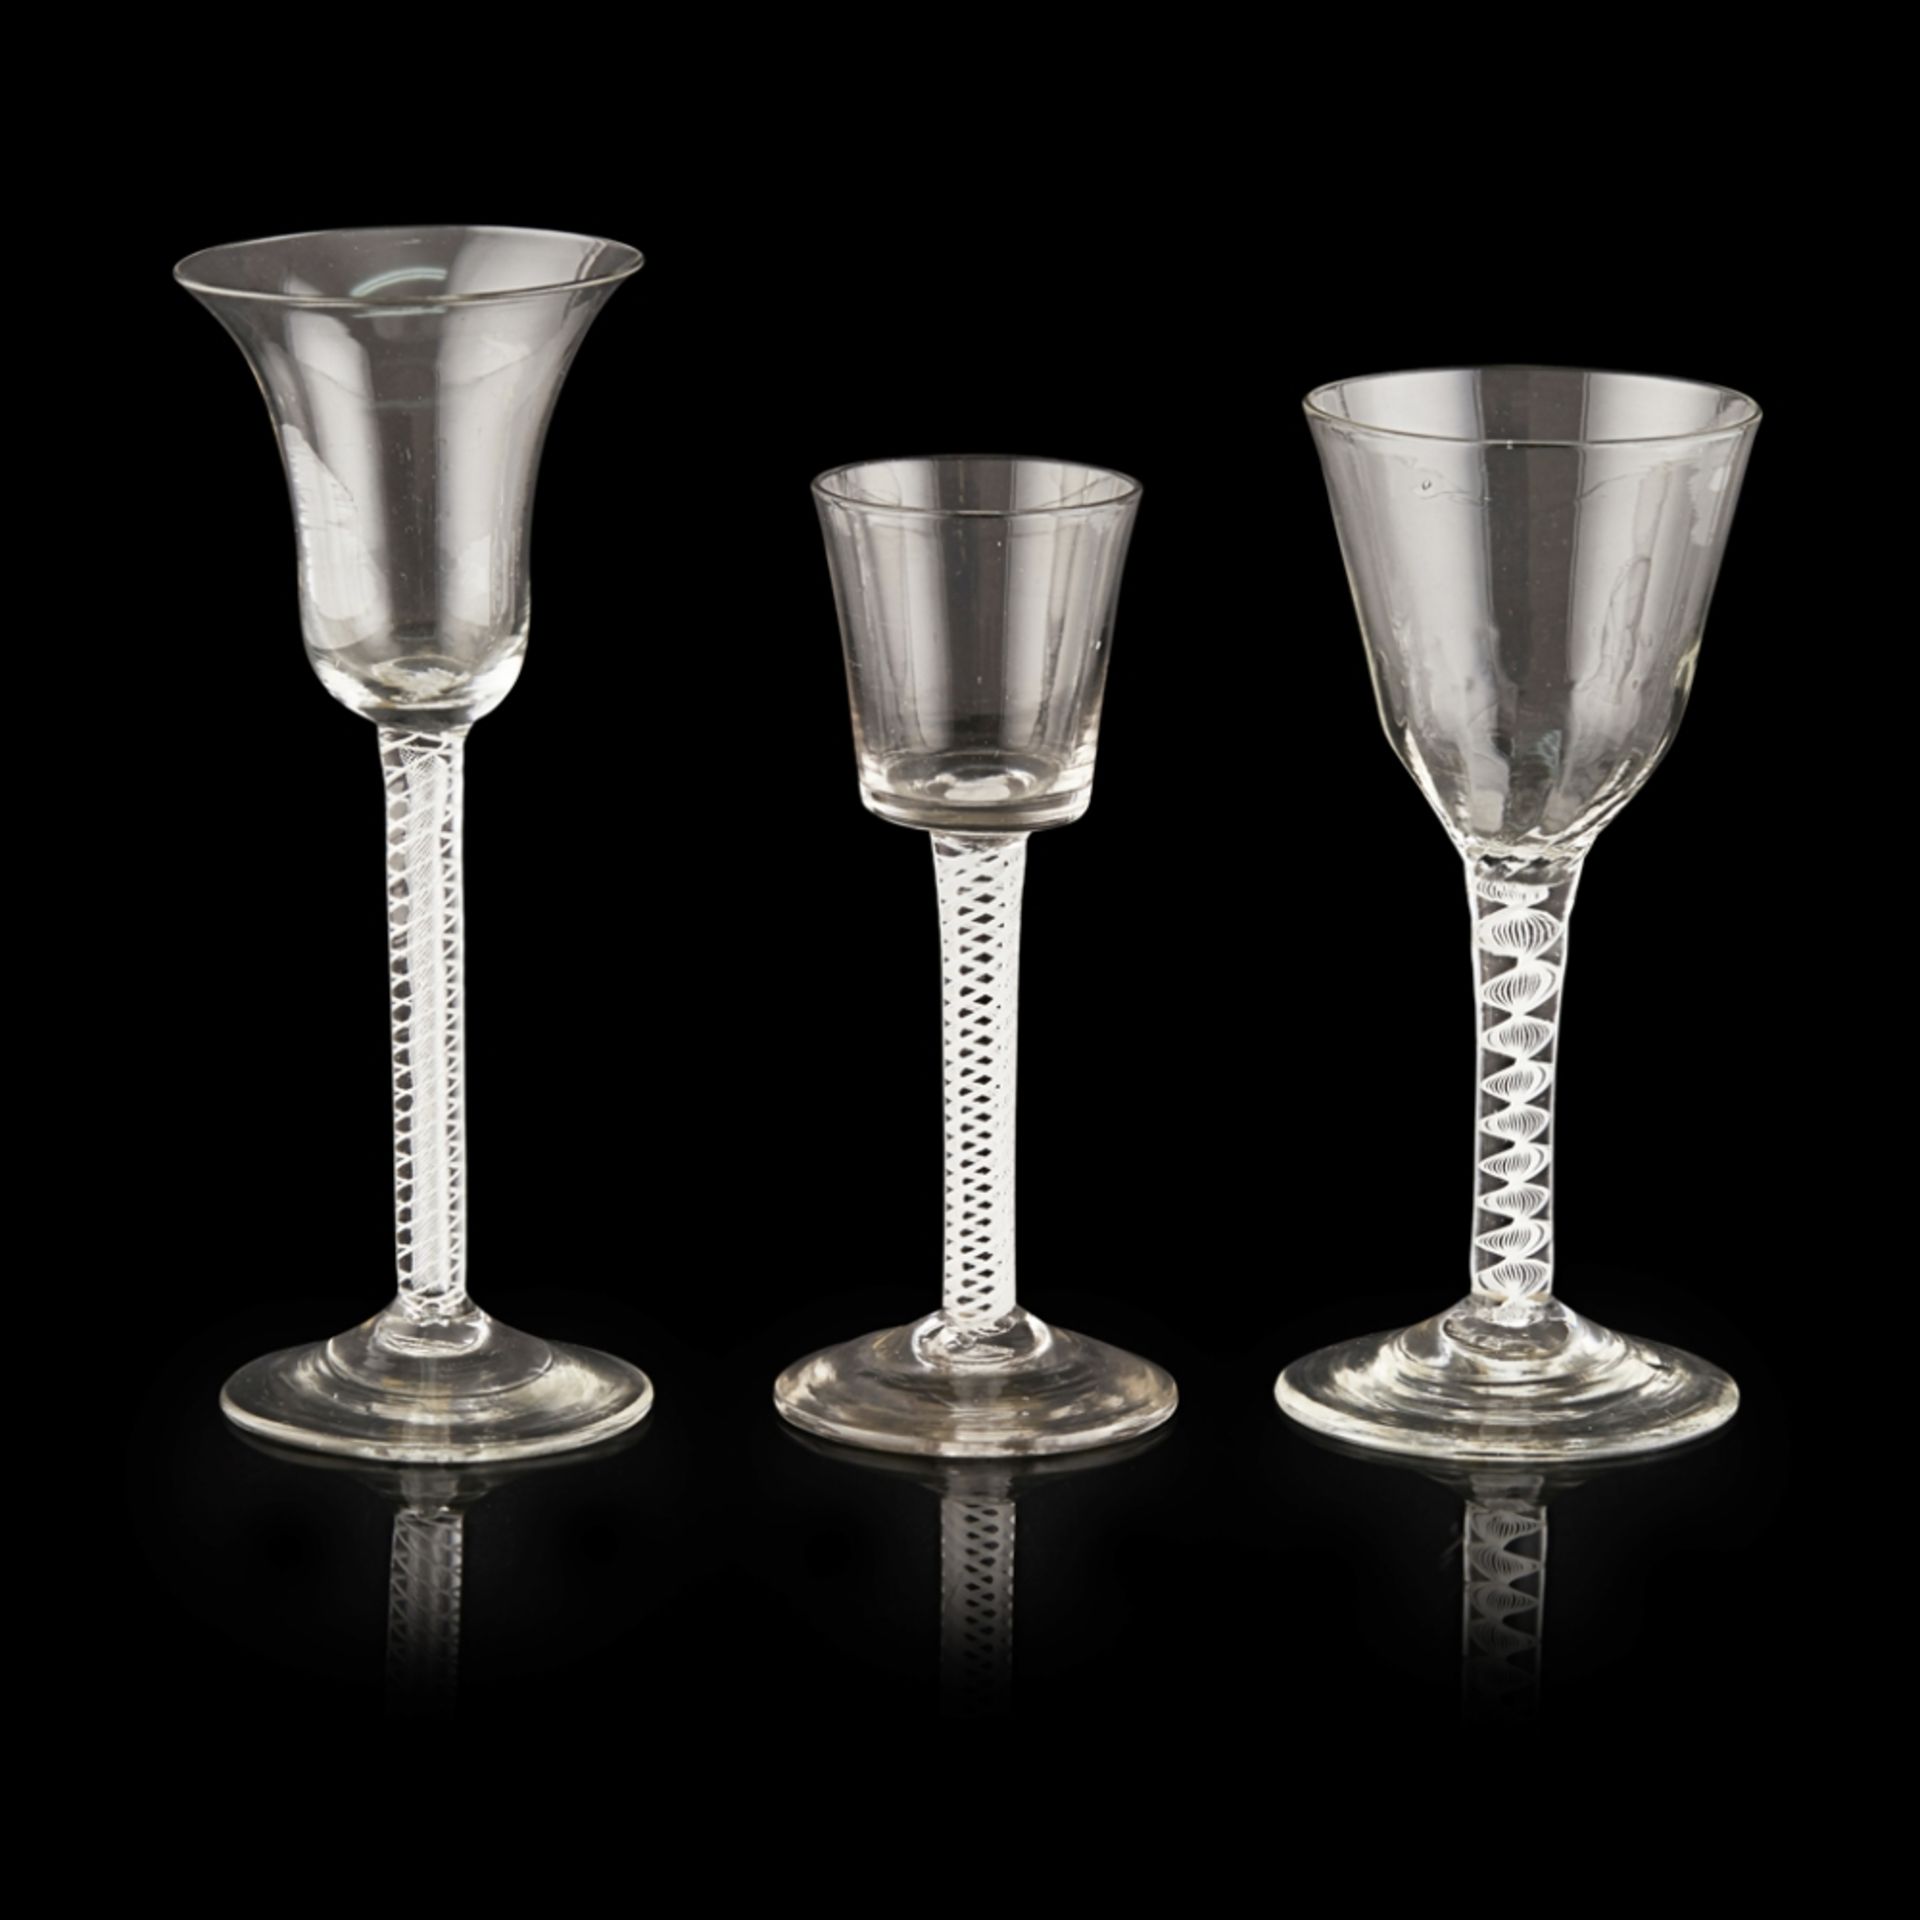 FOUR GEORGIAN TWIST STEM WINE GLASSESMID-18TH CENTURY comprising a bell bowled glass with a mixed - Image 3 of 3